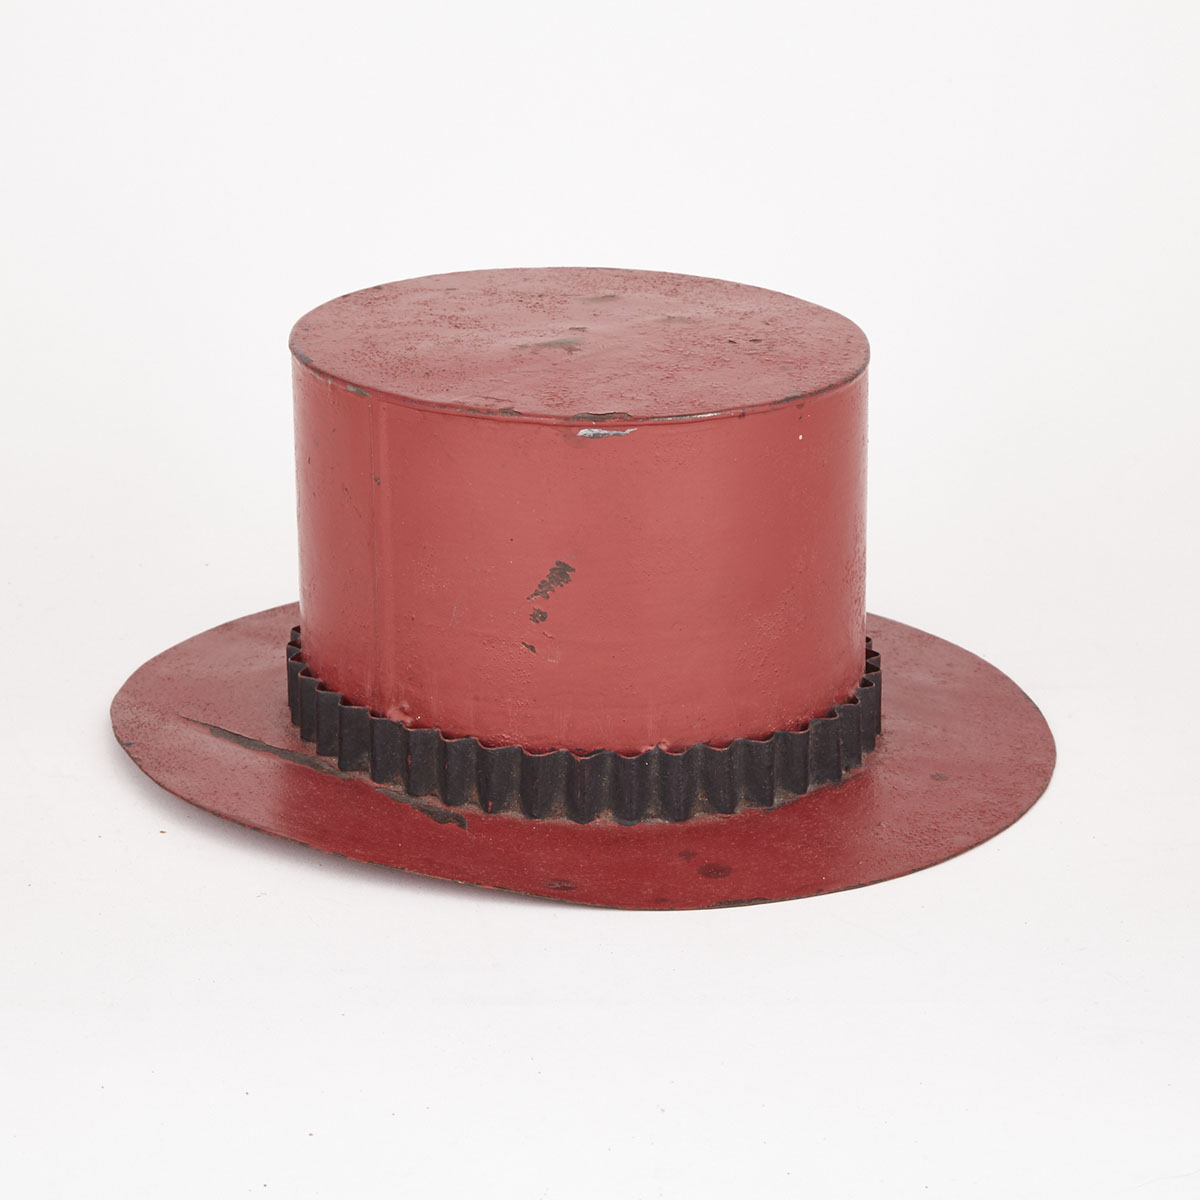 American Painted Tin Anniversary Stovepipe or Top Hat, 19th century